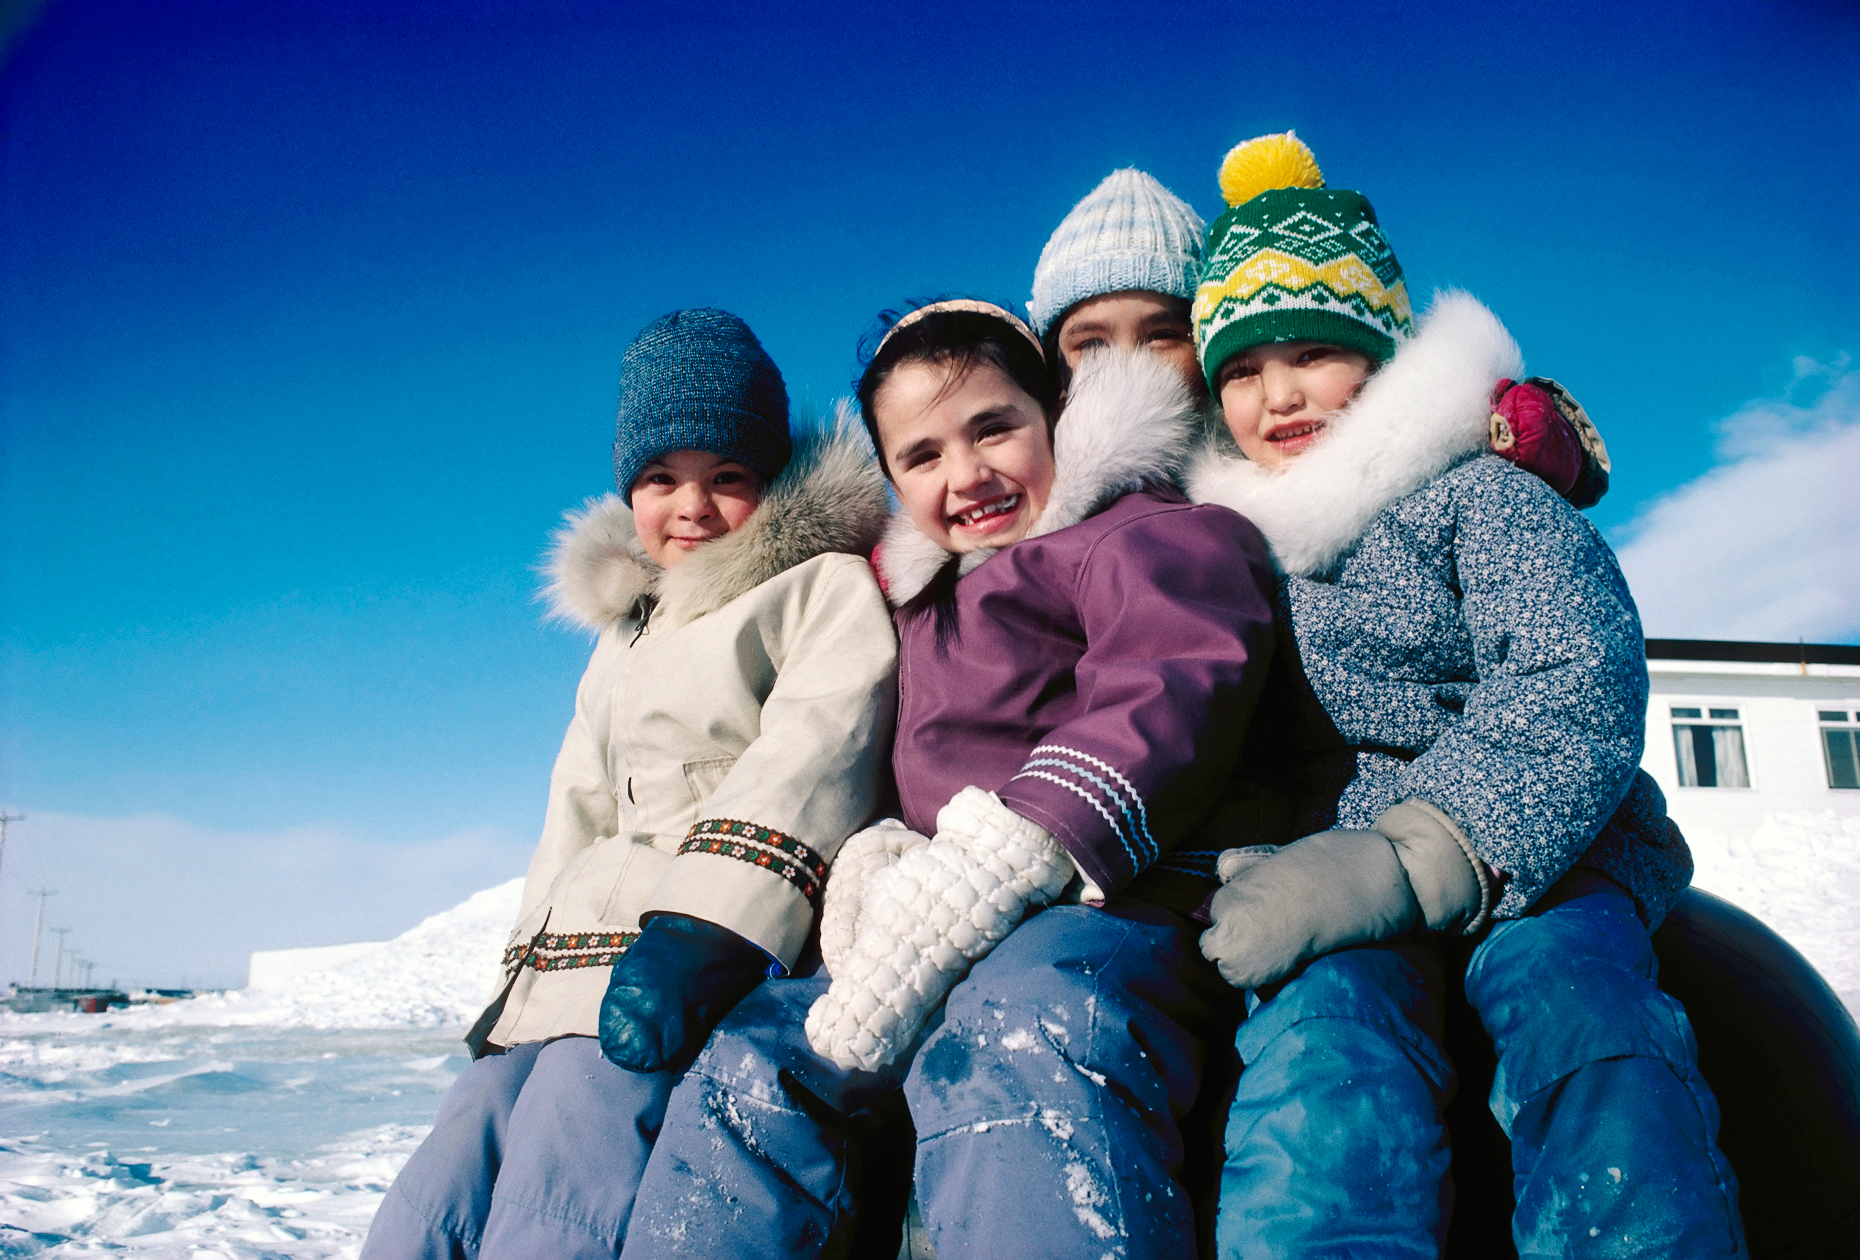 Inuit children pose for a photograph during school recess, Iqalu